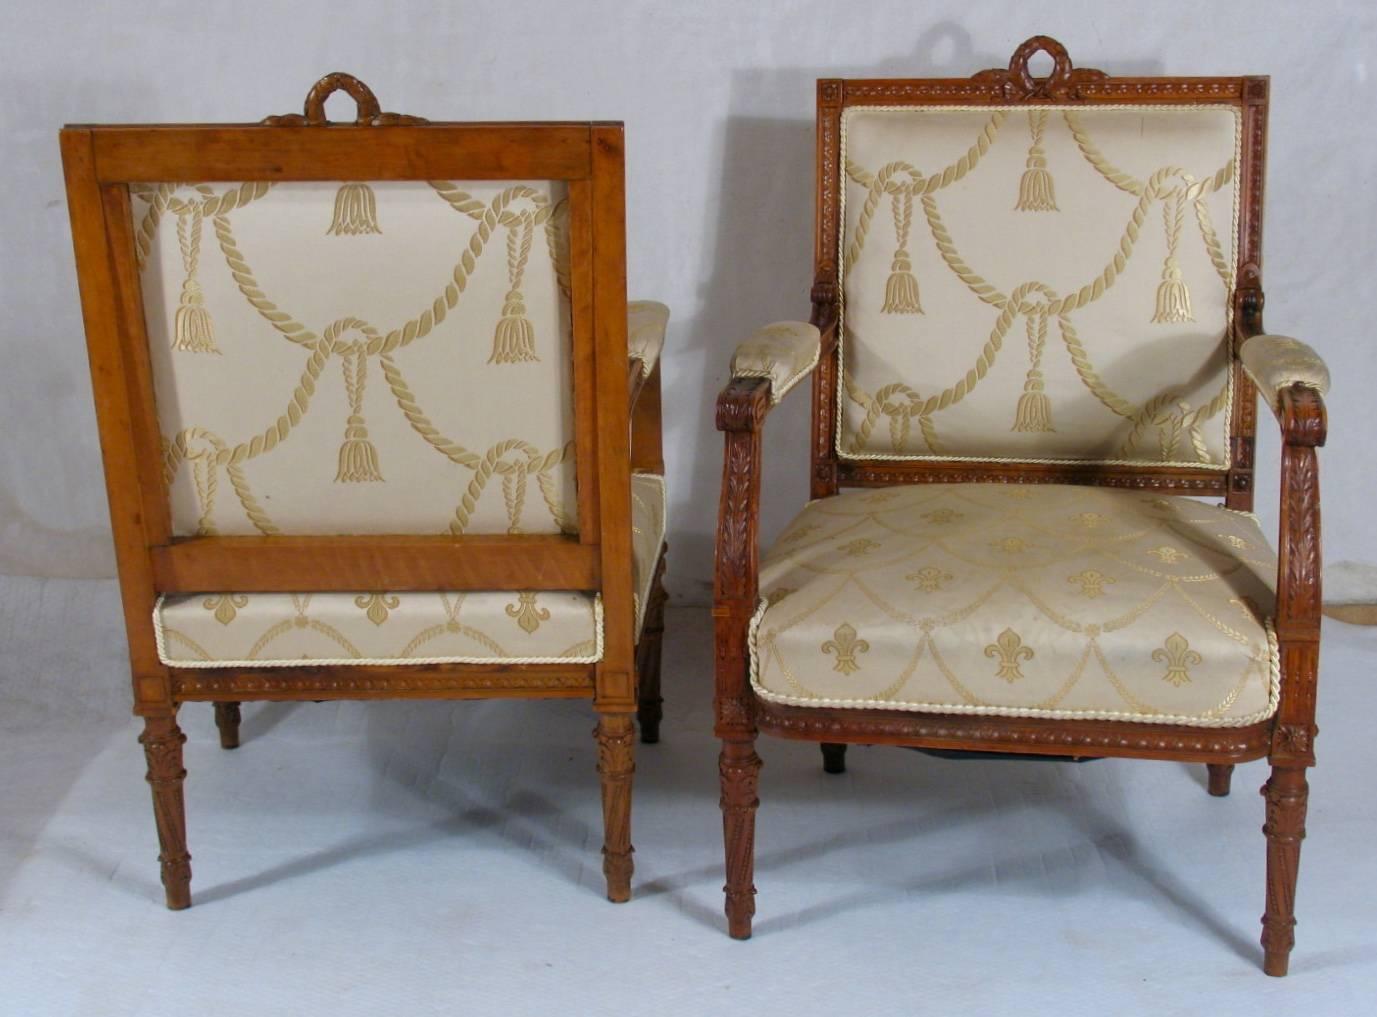 Elaborate pair of Louis XVI-style fauteuils, finely carved pearwood. Straight back crowned with wreath, upholstered seat and back, ending on round tapered baluster legs. Originally the fauteuils belonged to a salon suite composed of one settee and